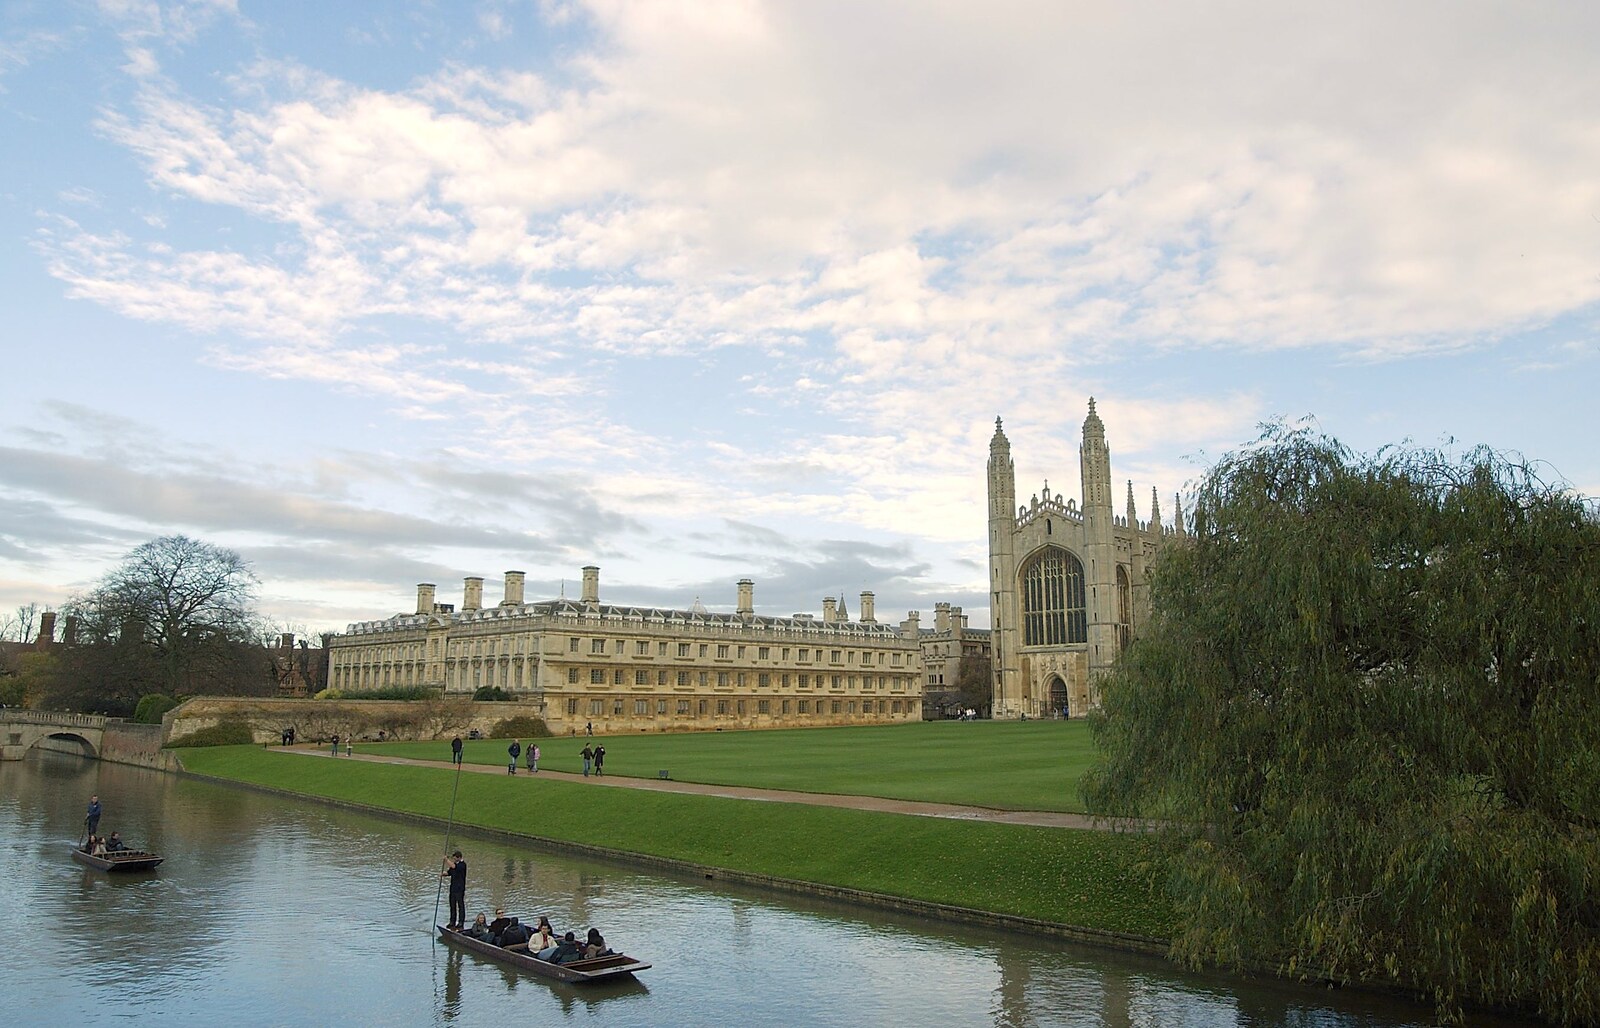 More punting on the Cam near King's College from Autumn Colleges: a Wander around The Backs, Cambridge - 26th November